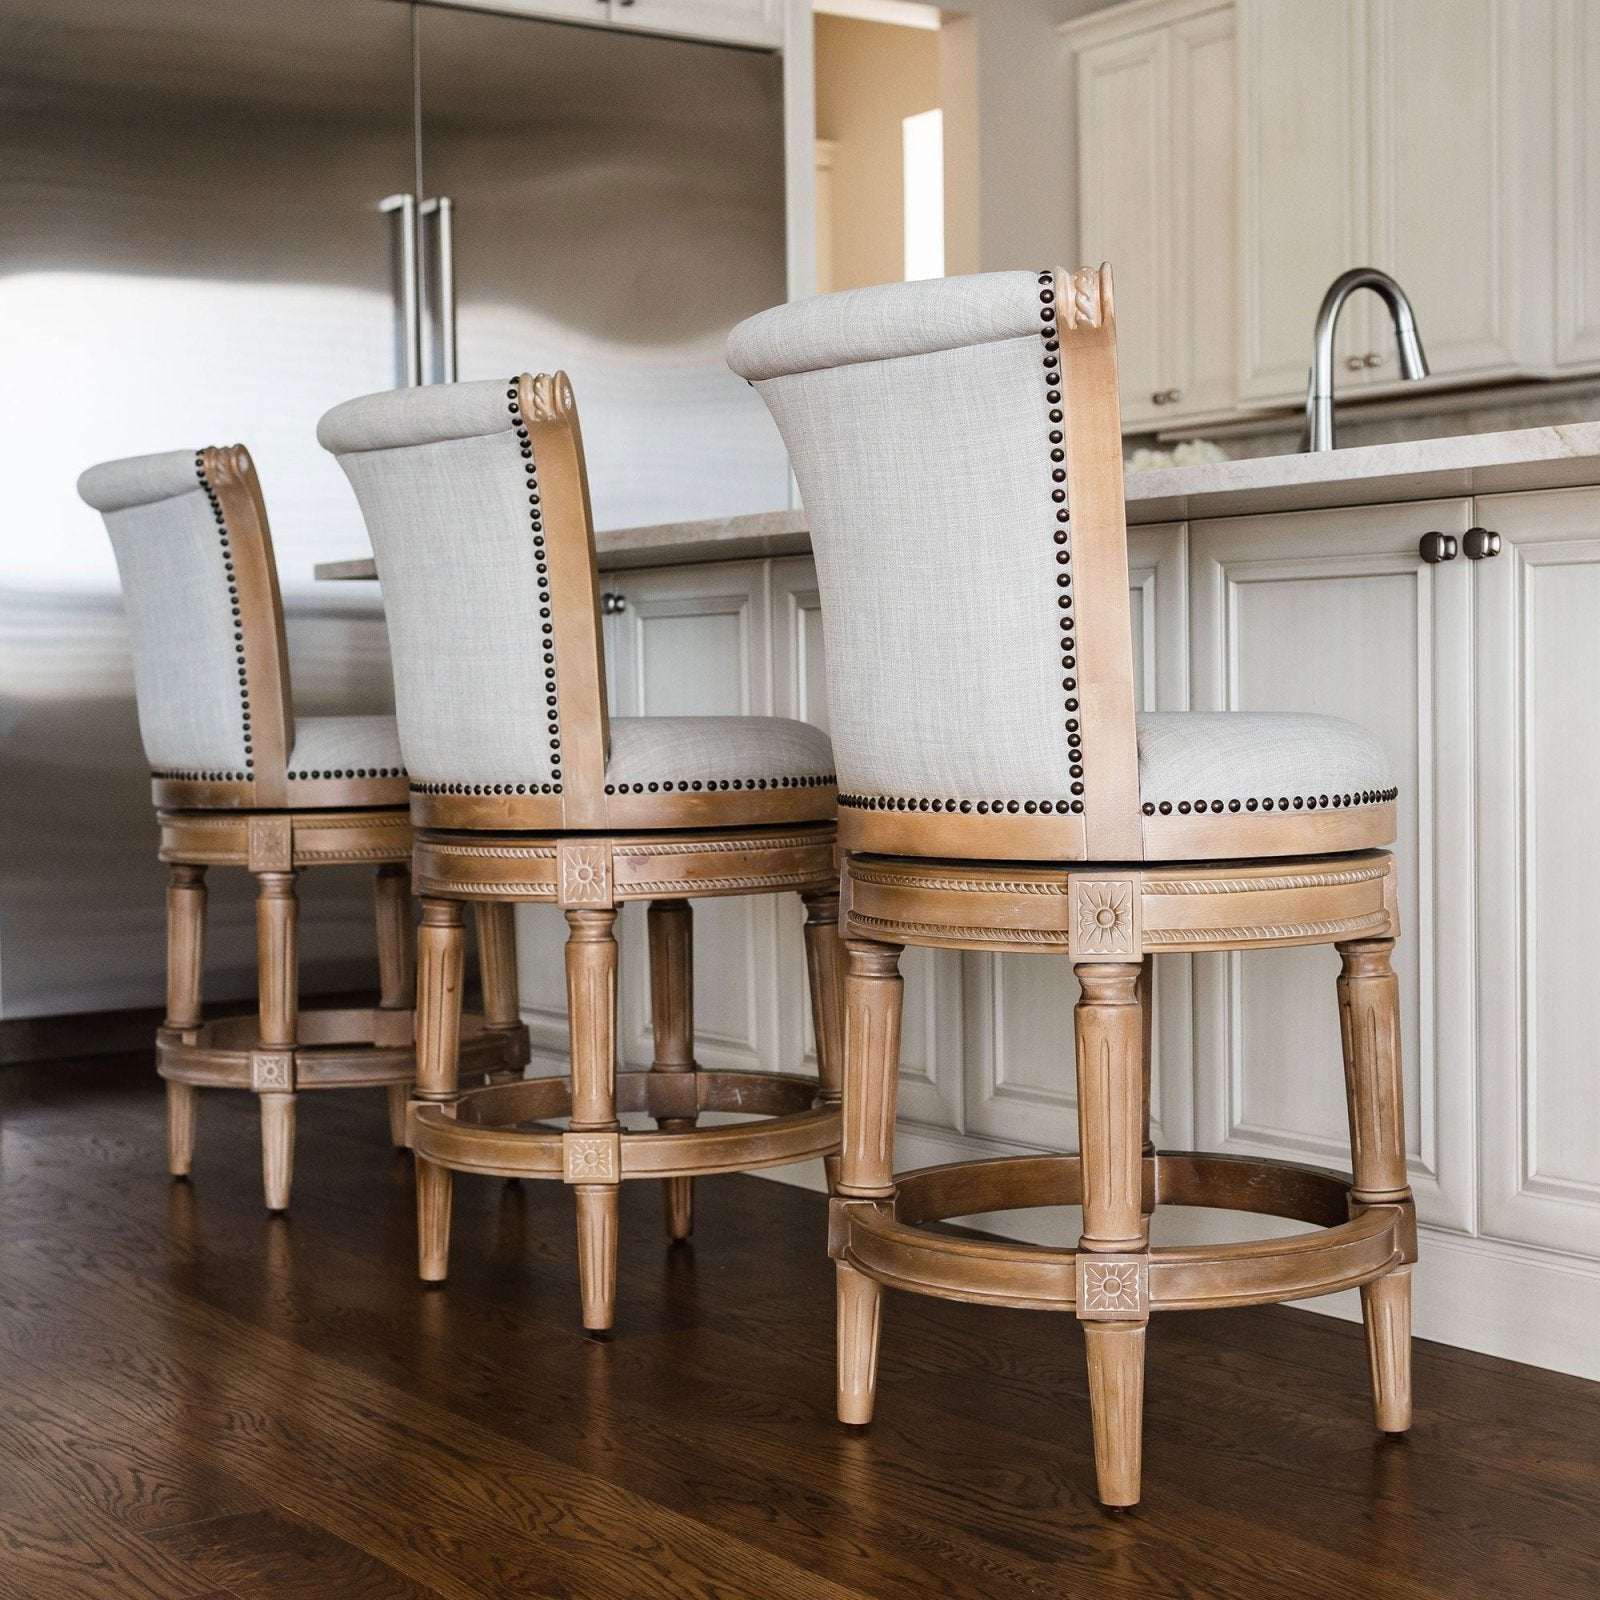 Pullman Counter Stool in Weathered Oak Finish with Sand Color Fabric Upholstery in Stools by Maven Lane